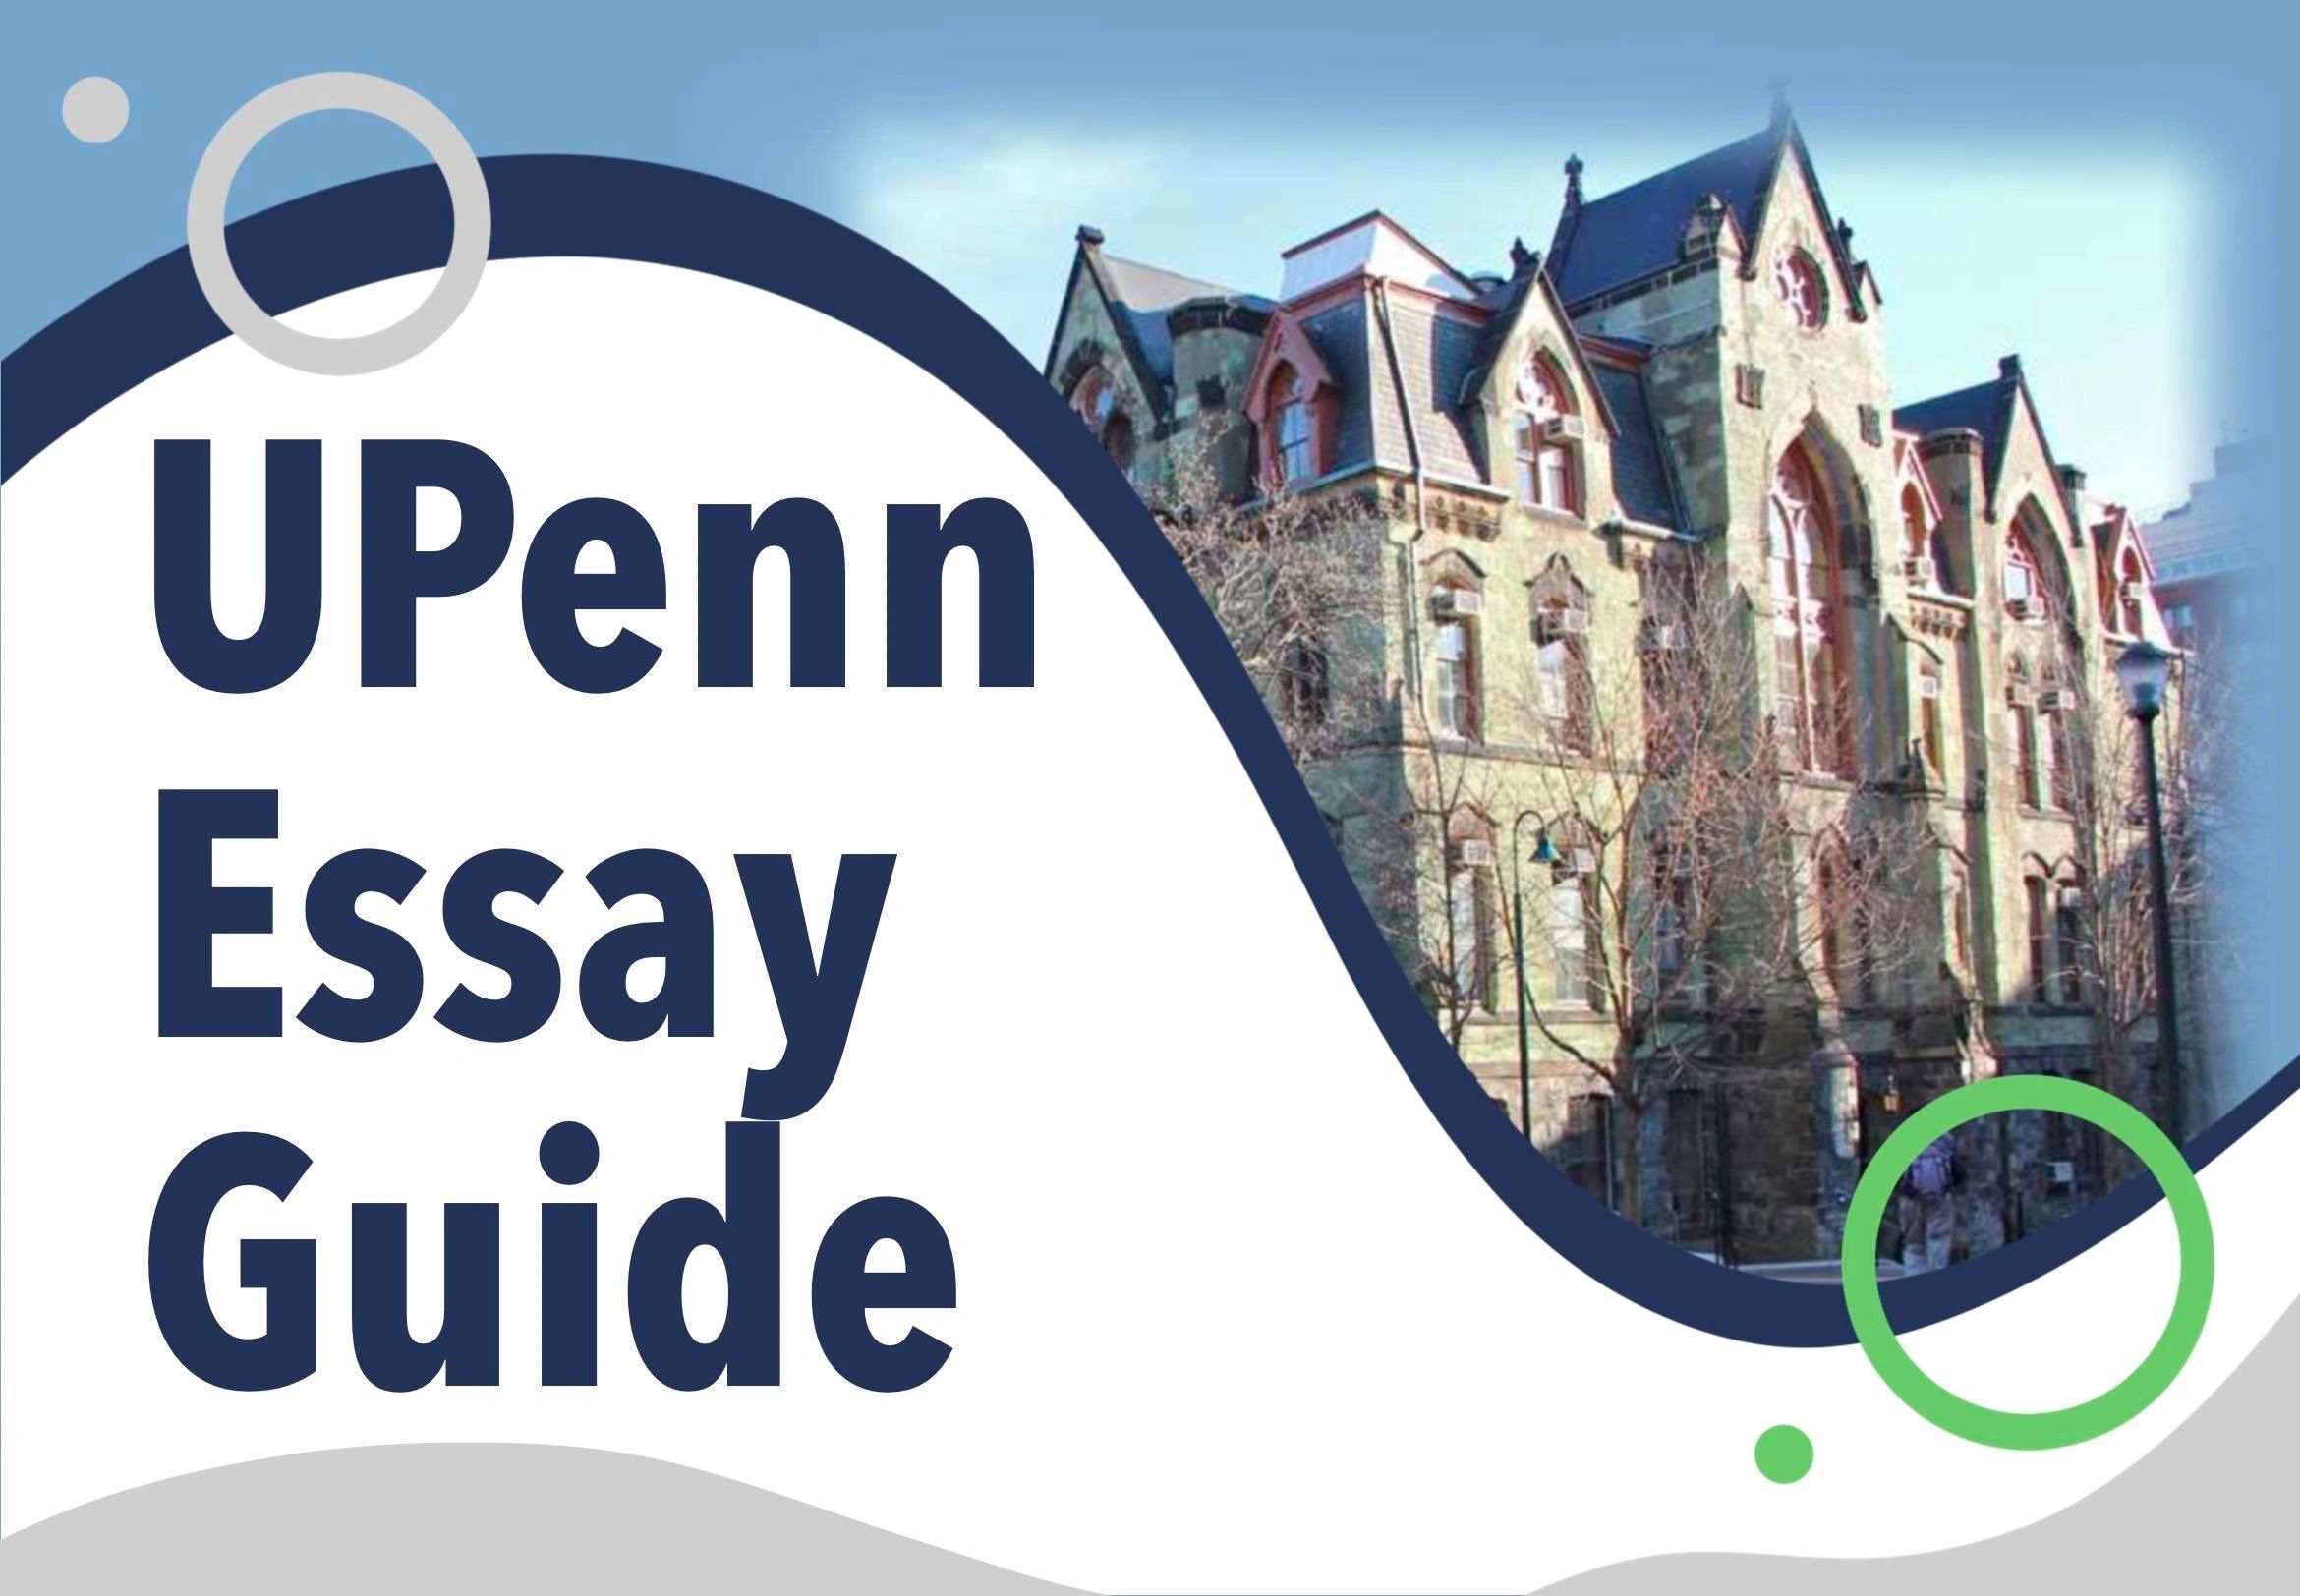 what essays does upenn require